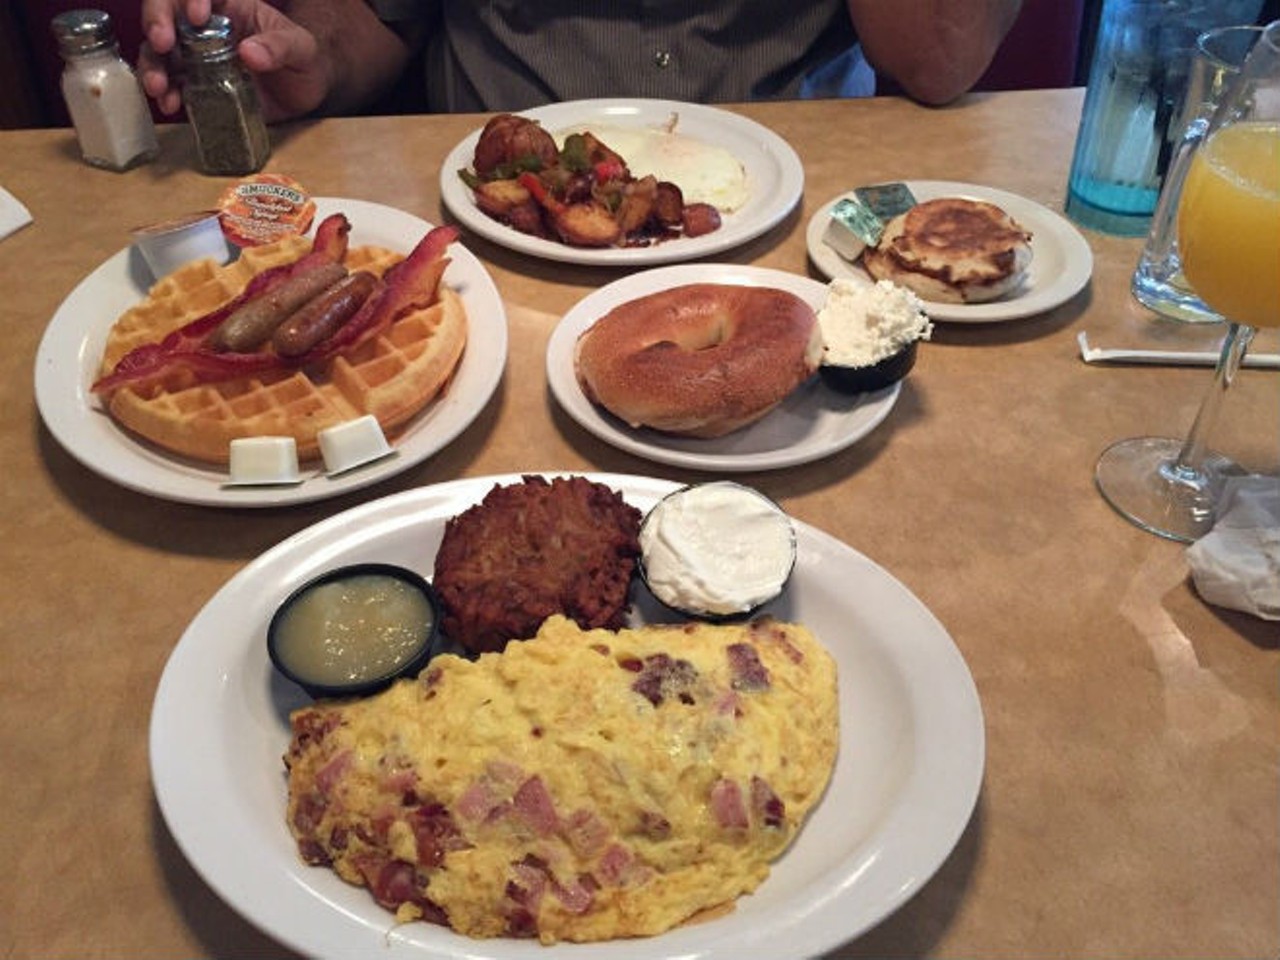 Toojay's
Breakfast served from 8:00 a.m. &#150; 10:00 p.m.
Multiple locations
http://www.toojays.com/
Photo via Yelp